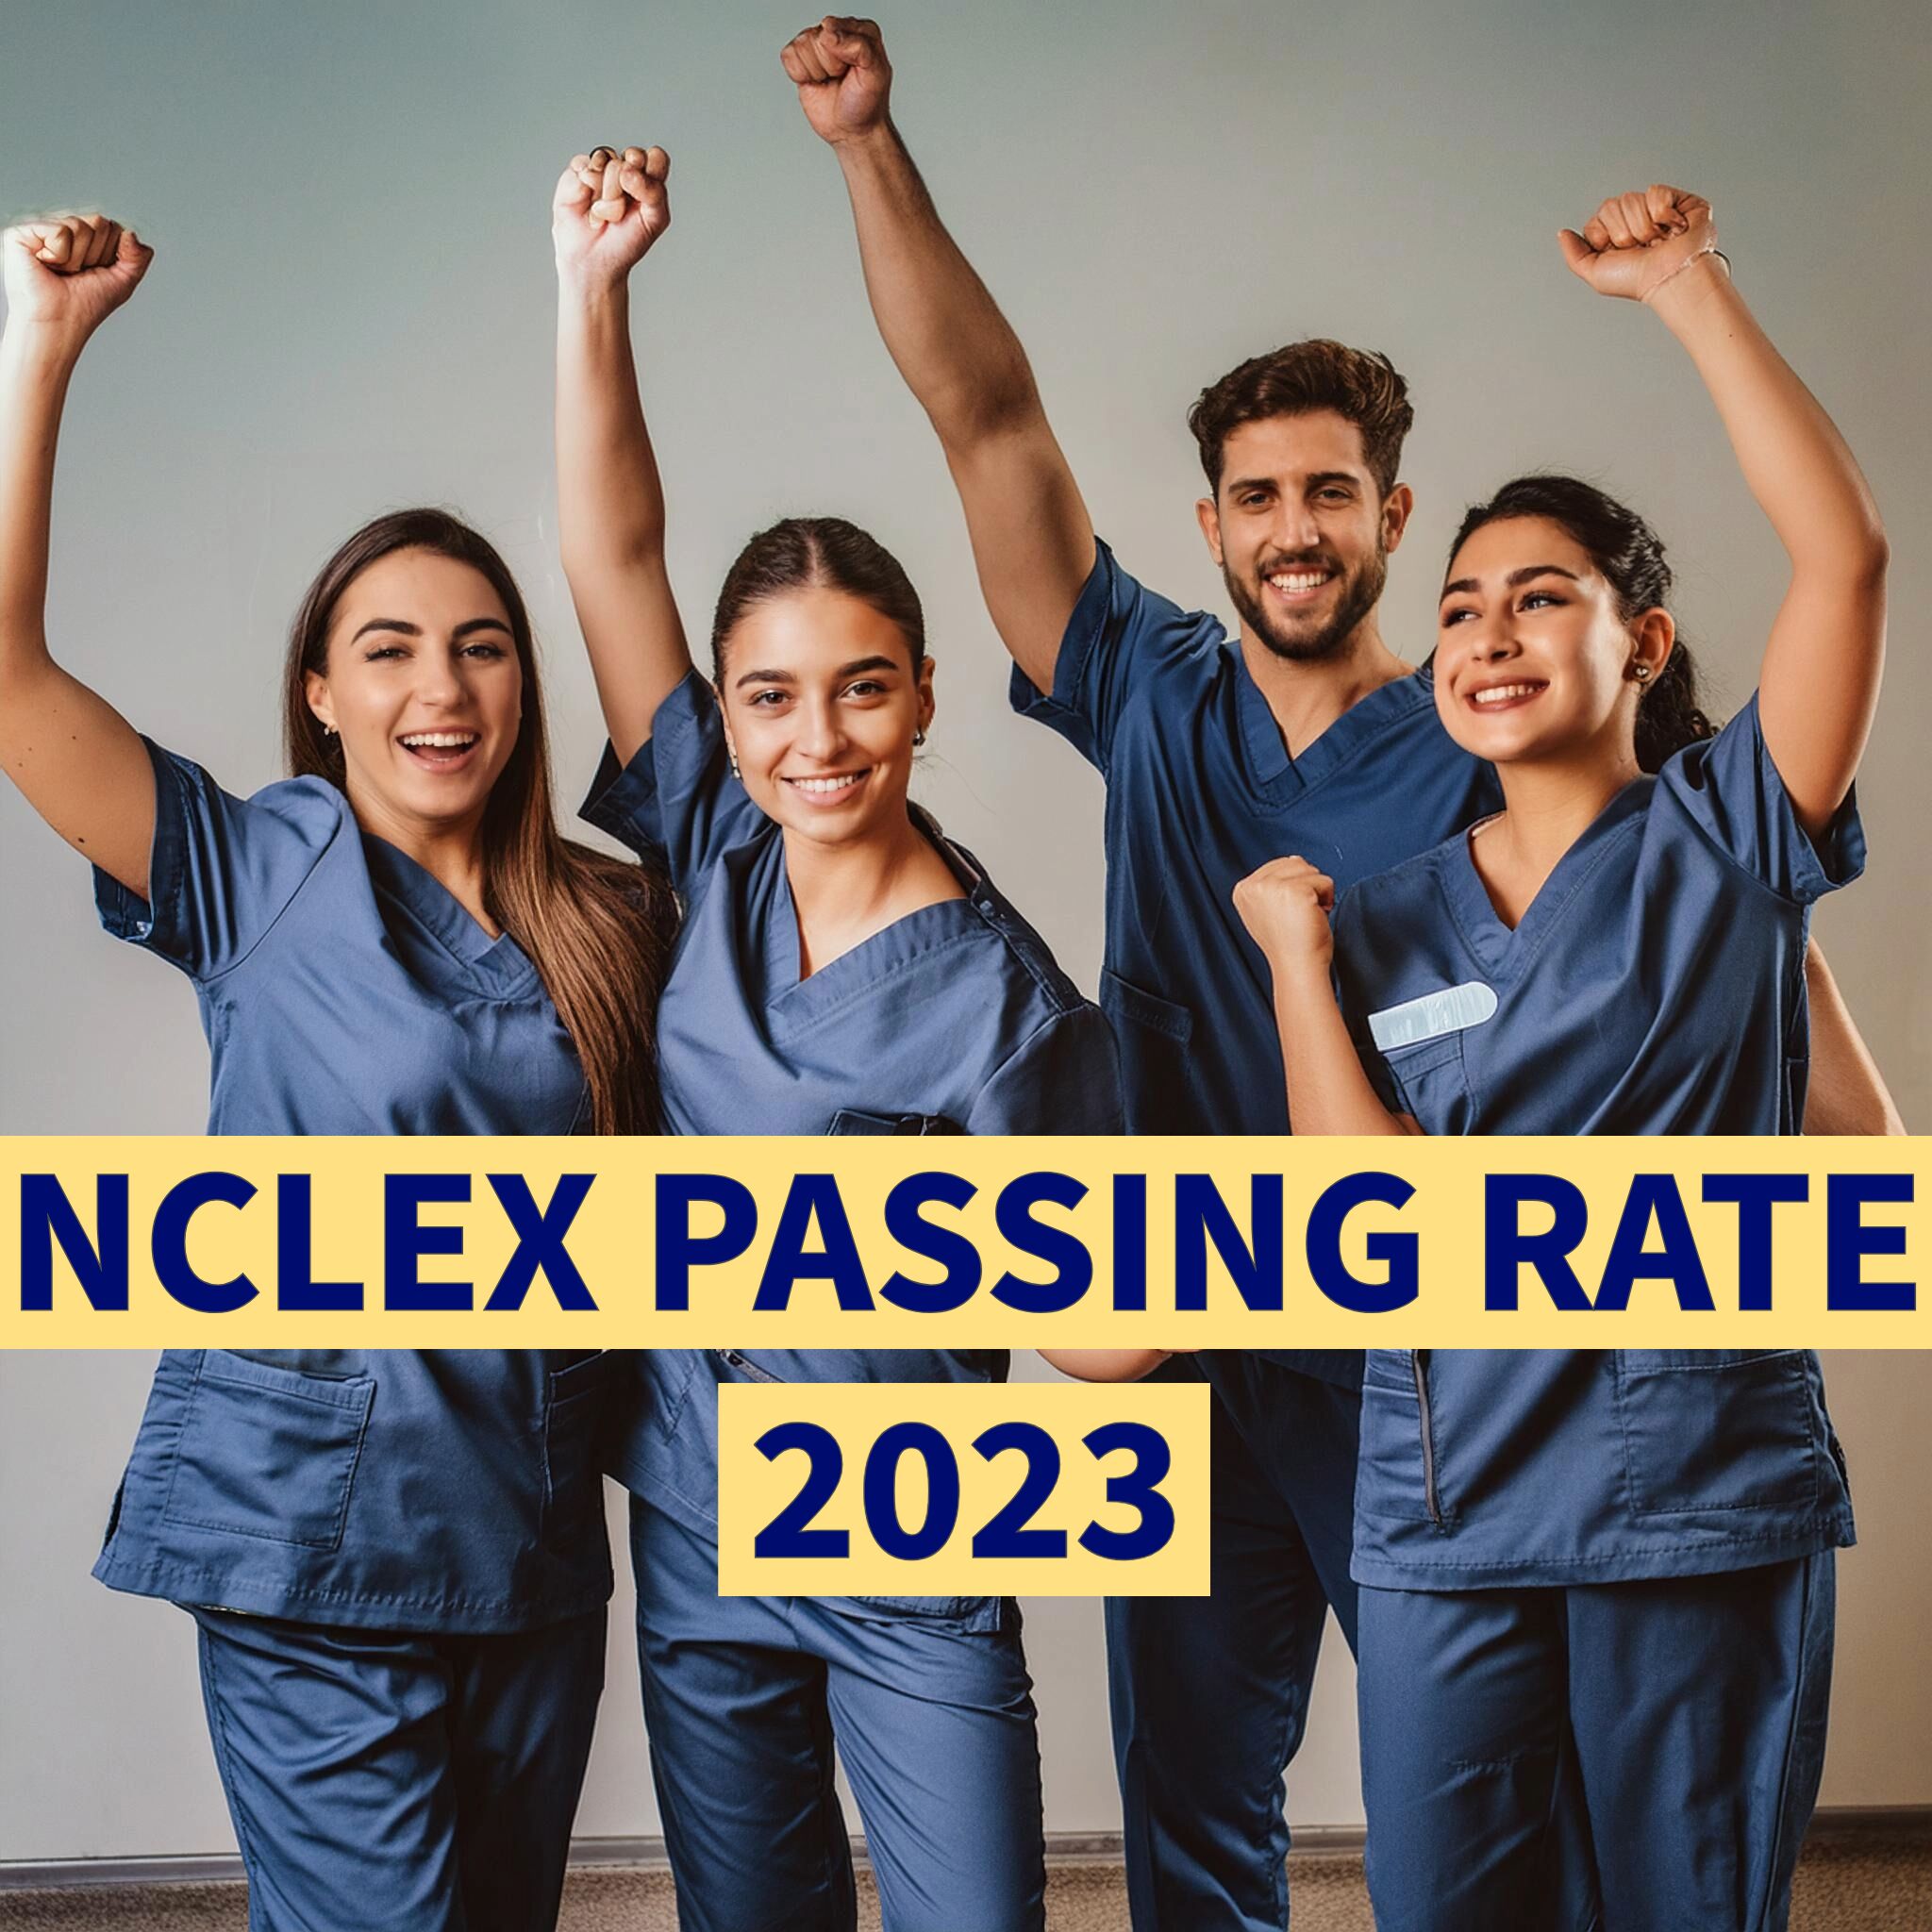 Four Beckfield College students cheering for the 2023 NCLEX passing rates